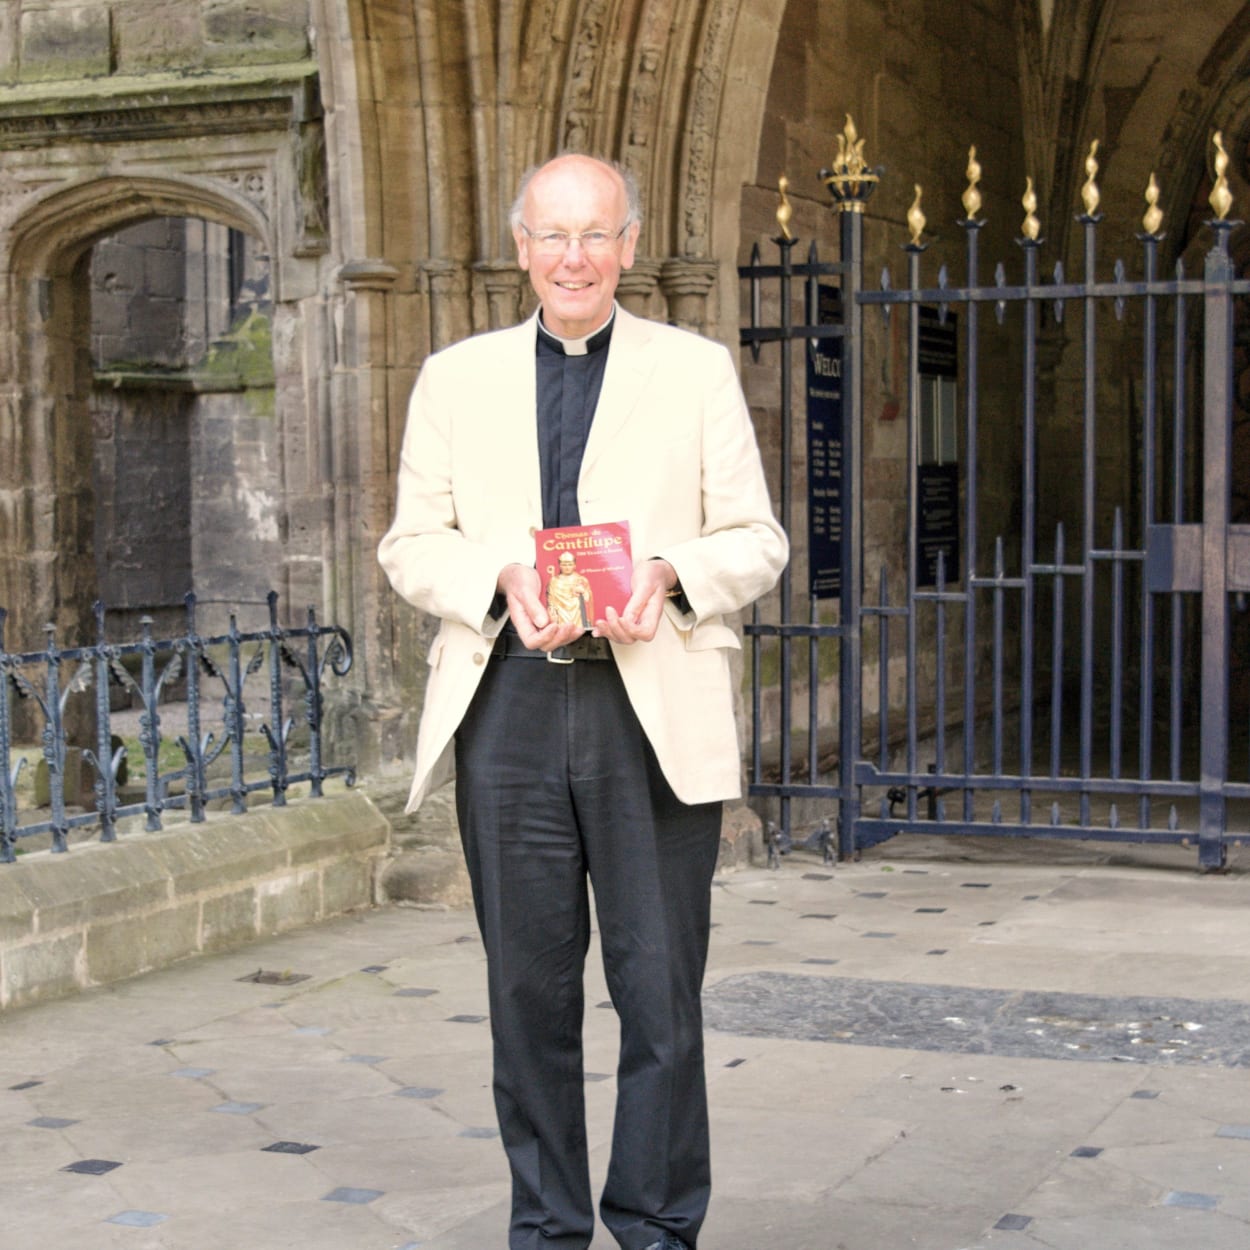 The Dean stands outside the gates of the cathedral smiling with a copy of the book in his hands